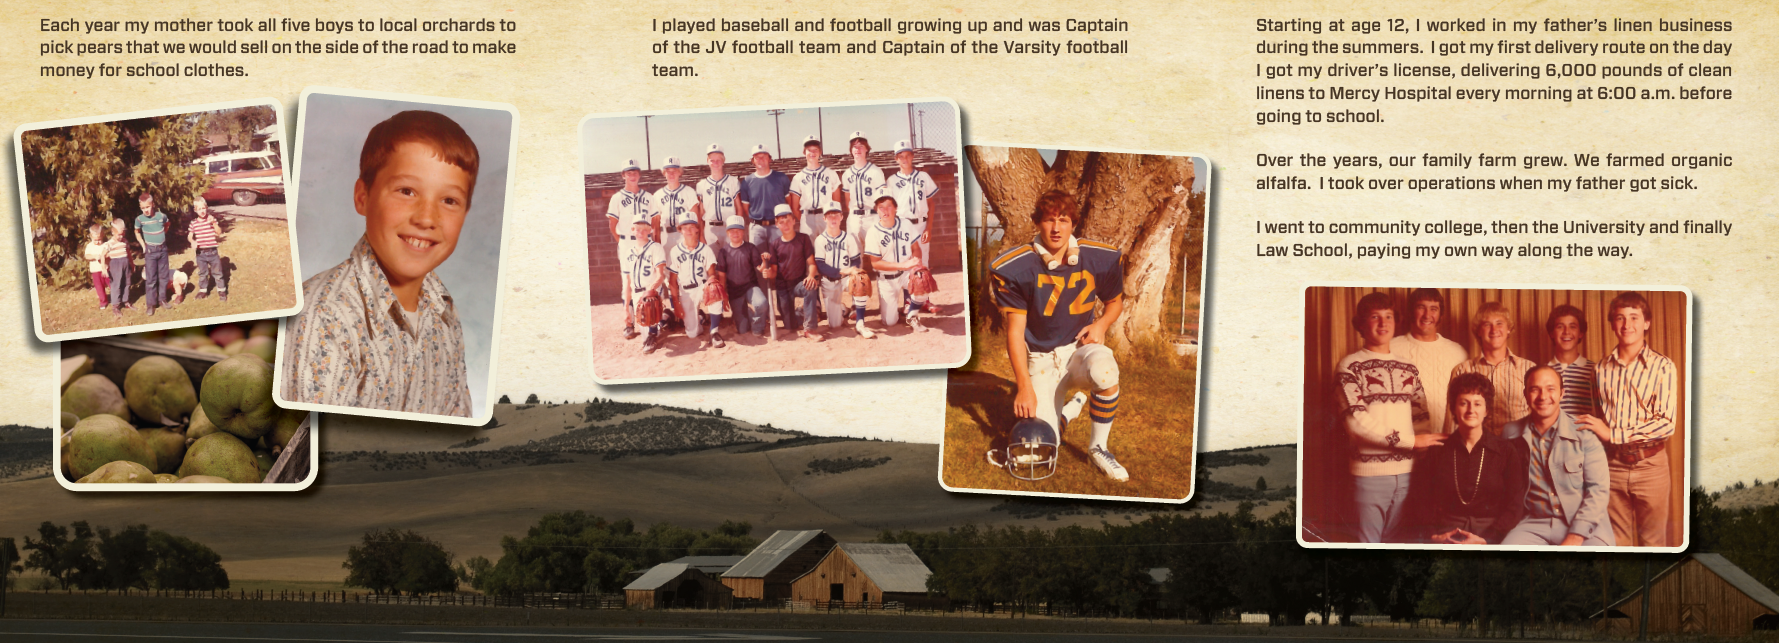 Photos of Scott Baugh as a child, his baseball team, in his football uniform, and of his family.